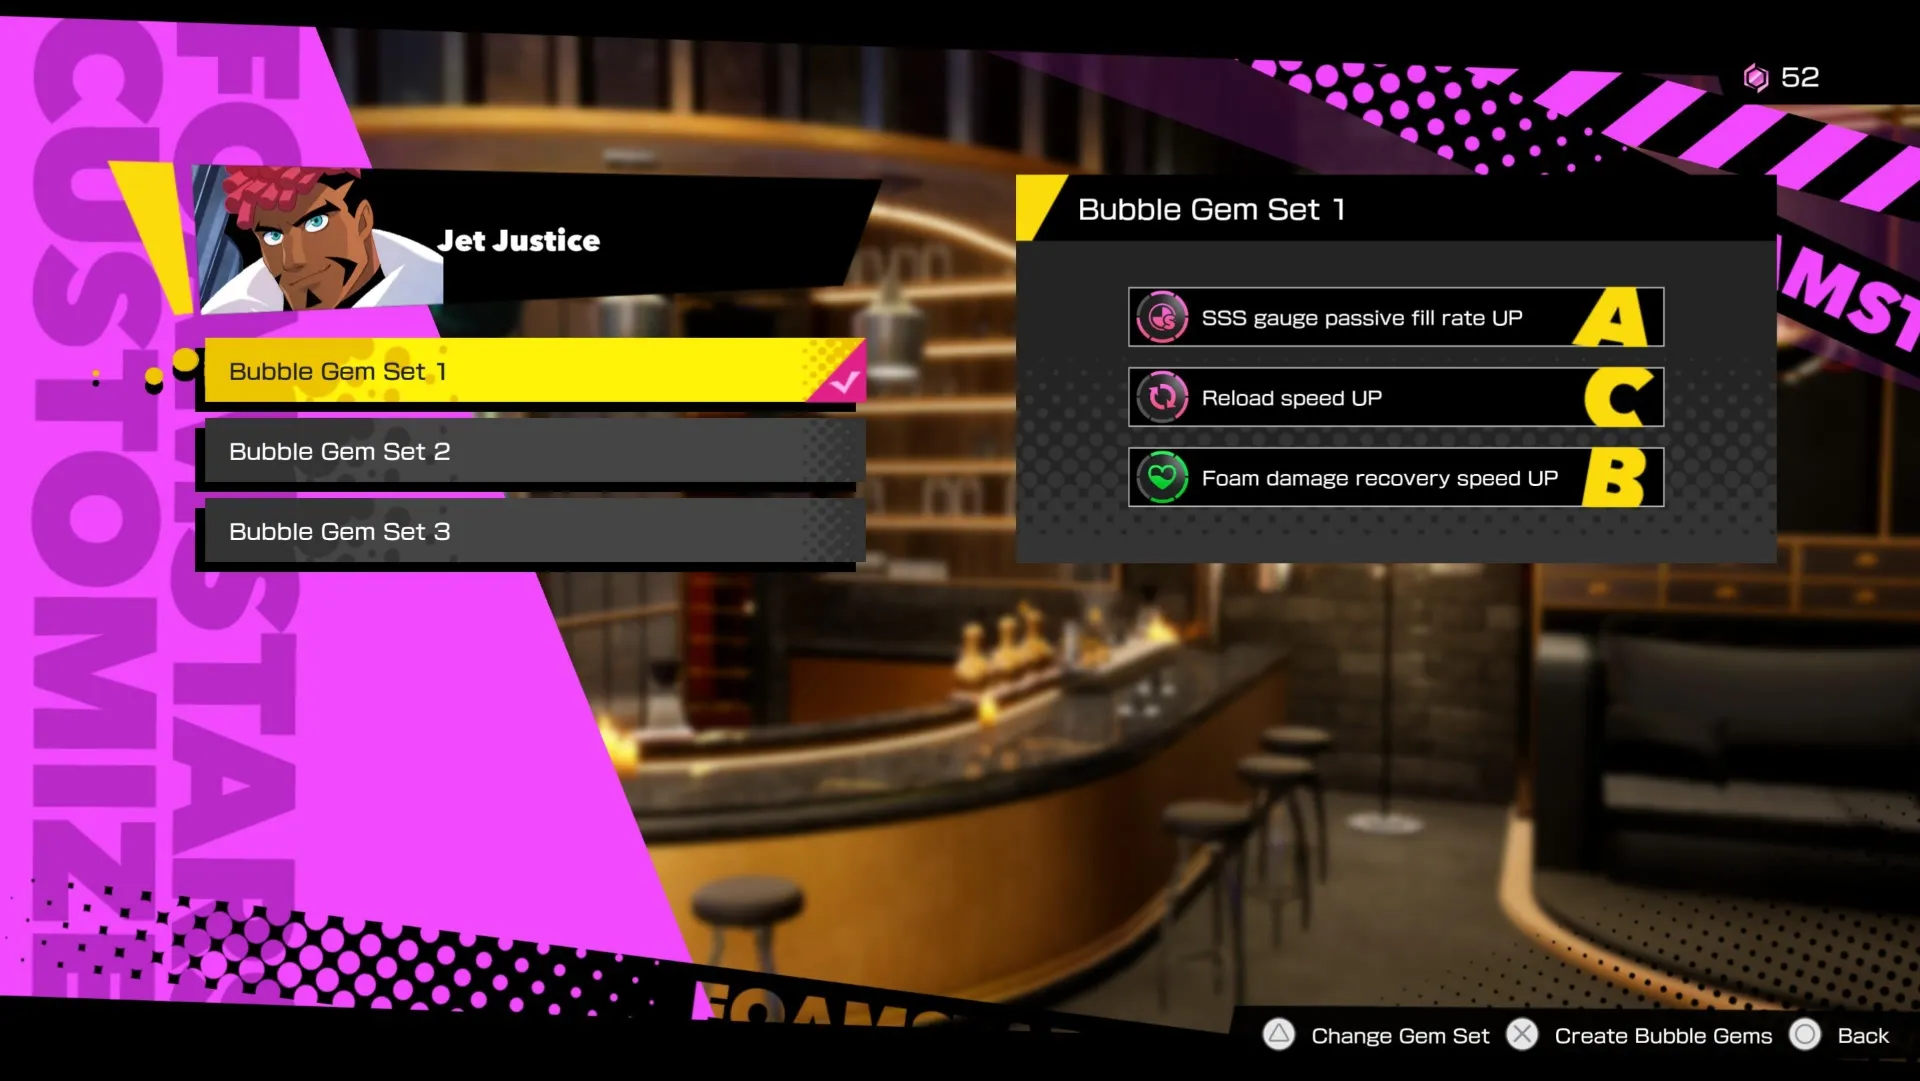 Jet Justice showing the Bubble Gem Set 1, with multiple boosts in Foamstars.